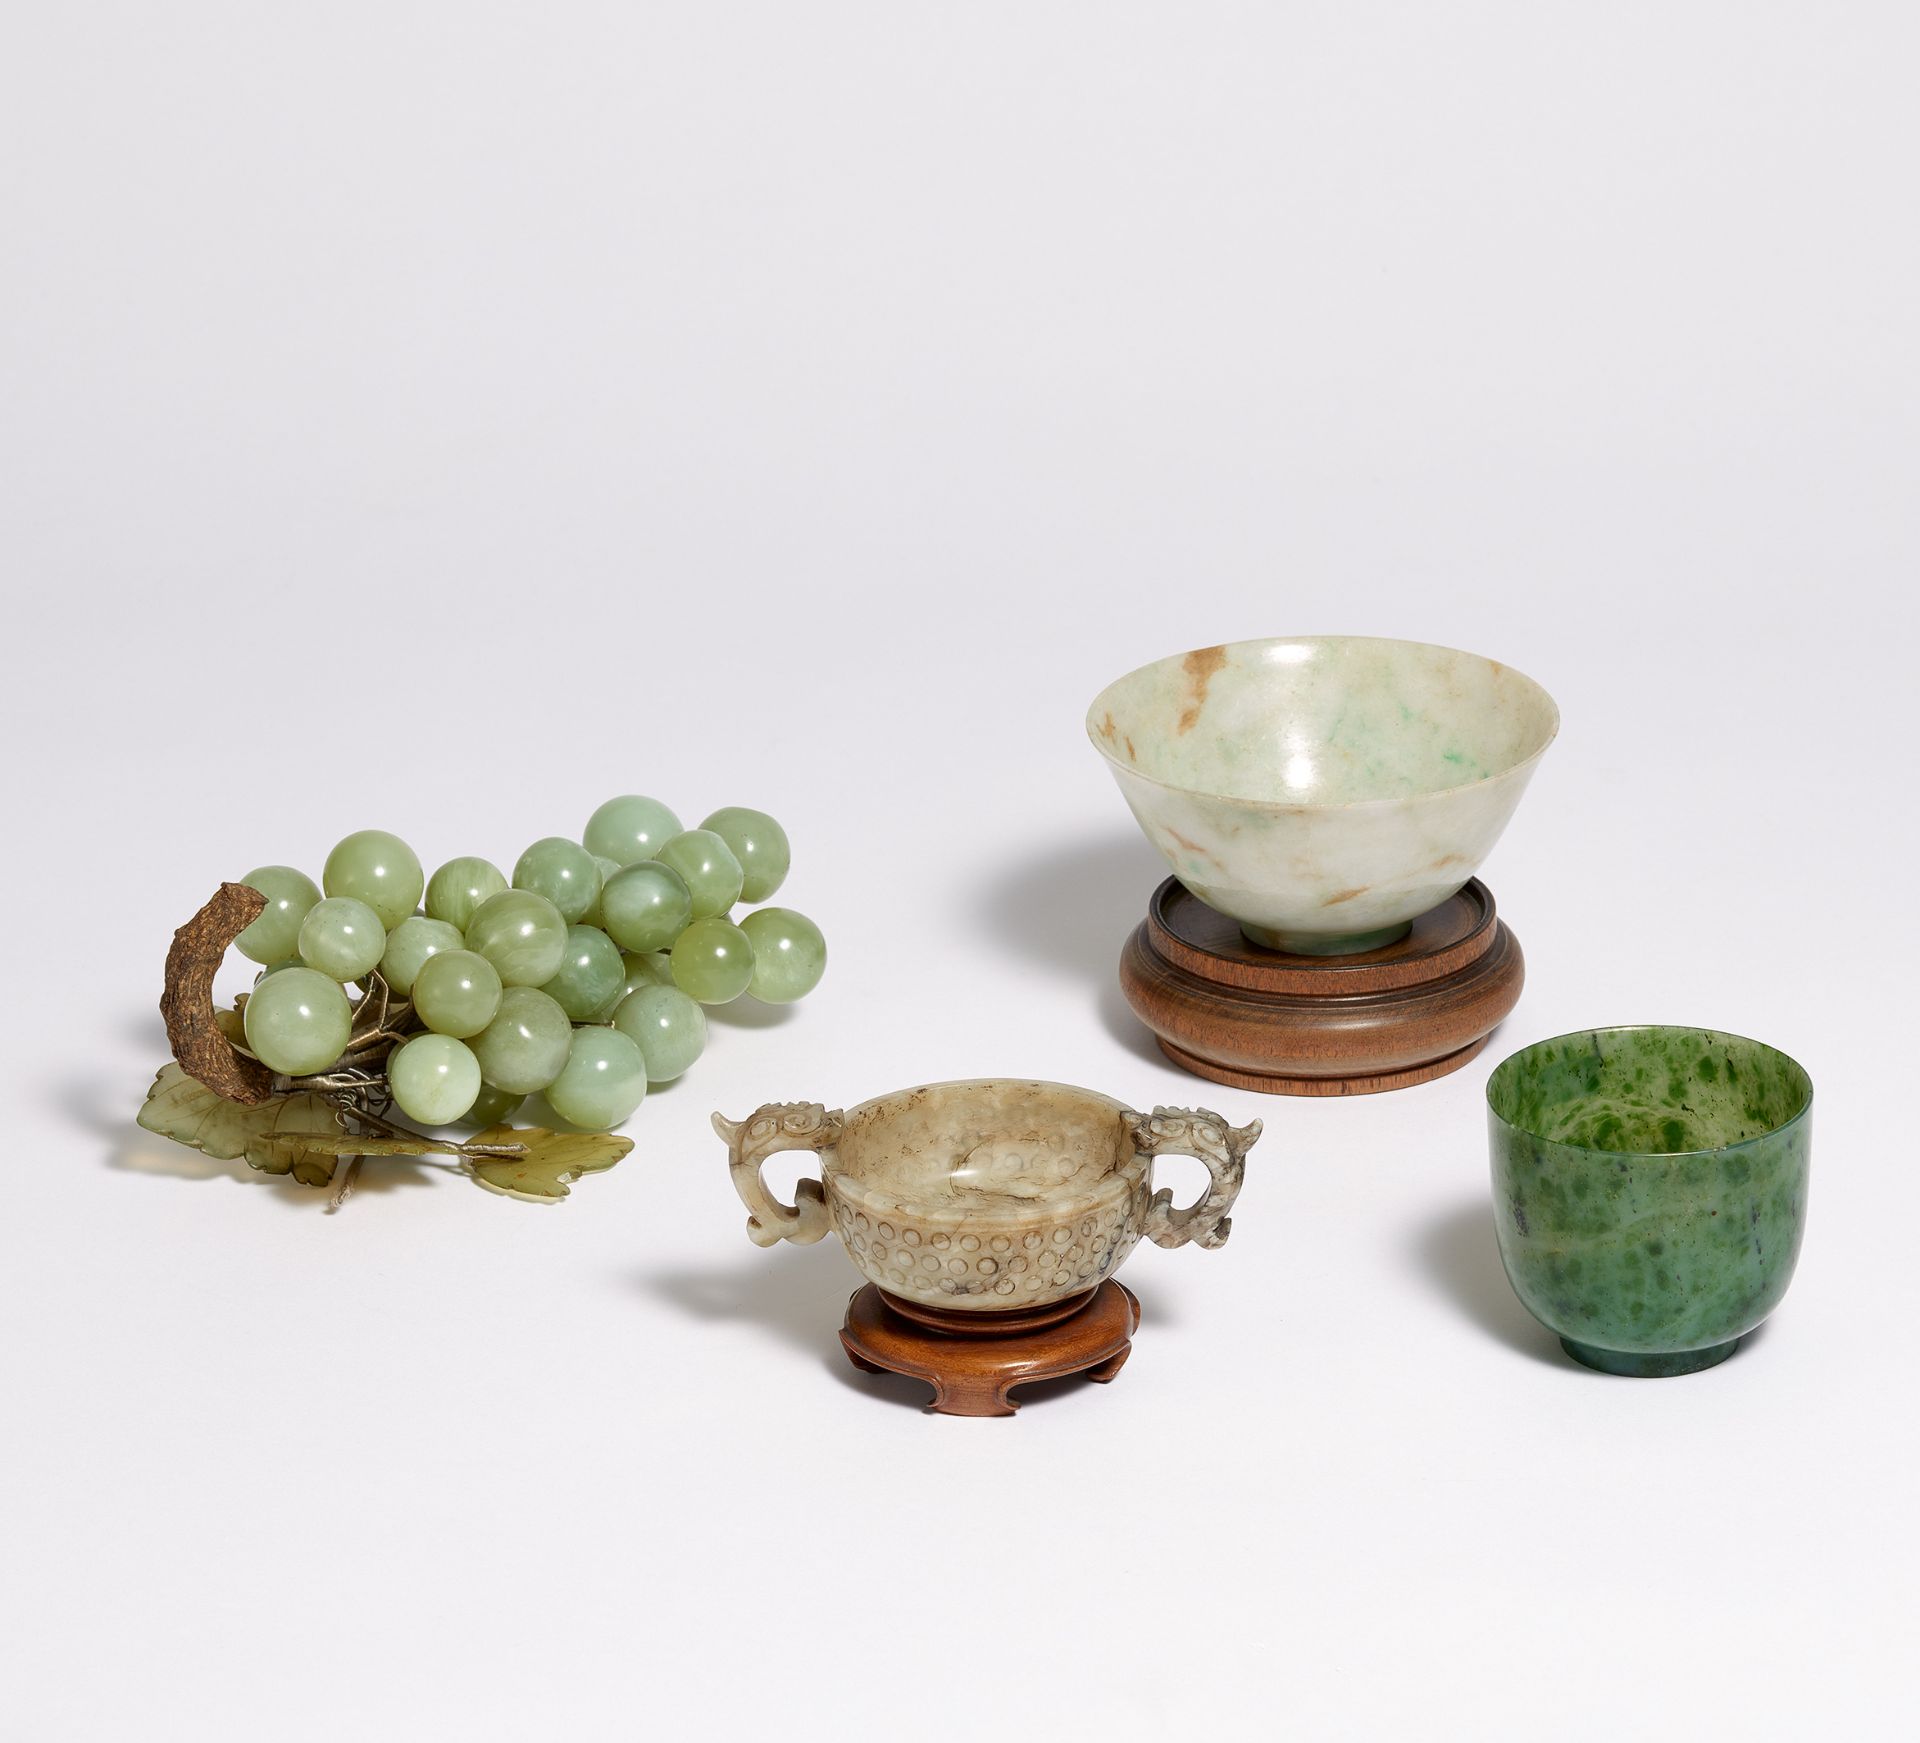 WEDDING BOWL WITH DRAGON HANDLES AND TWO DRINKING BOWLS. 19th-20th c. Jade, grey with dark veins,